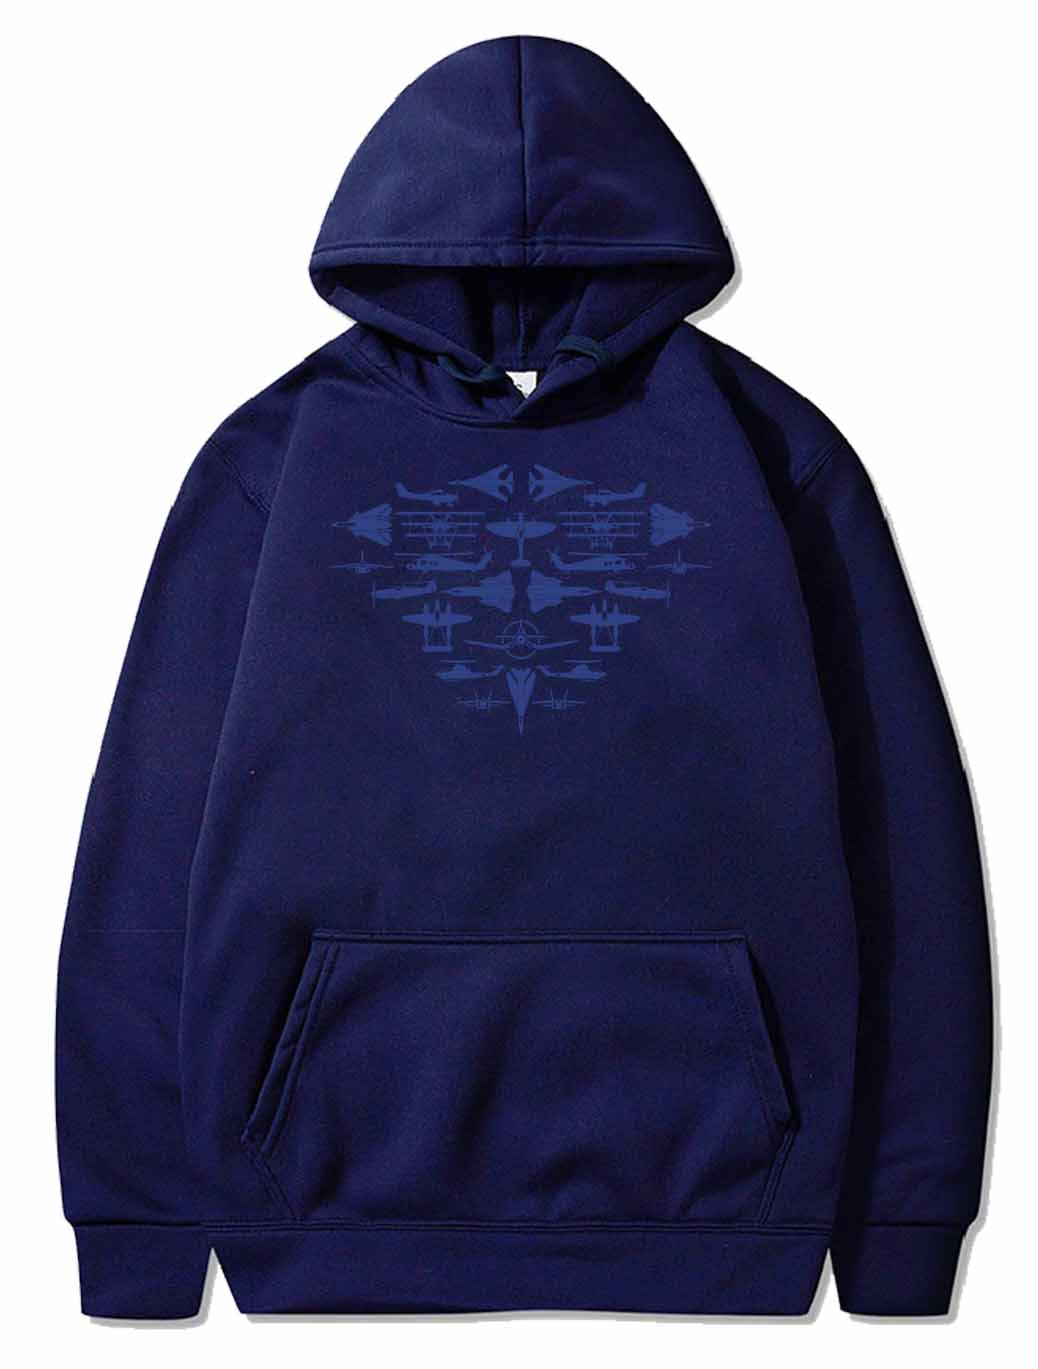 Aircraft collage PULLOVER THE AV8R